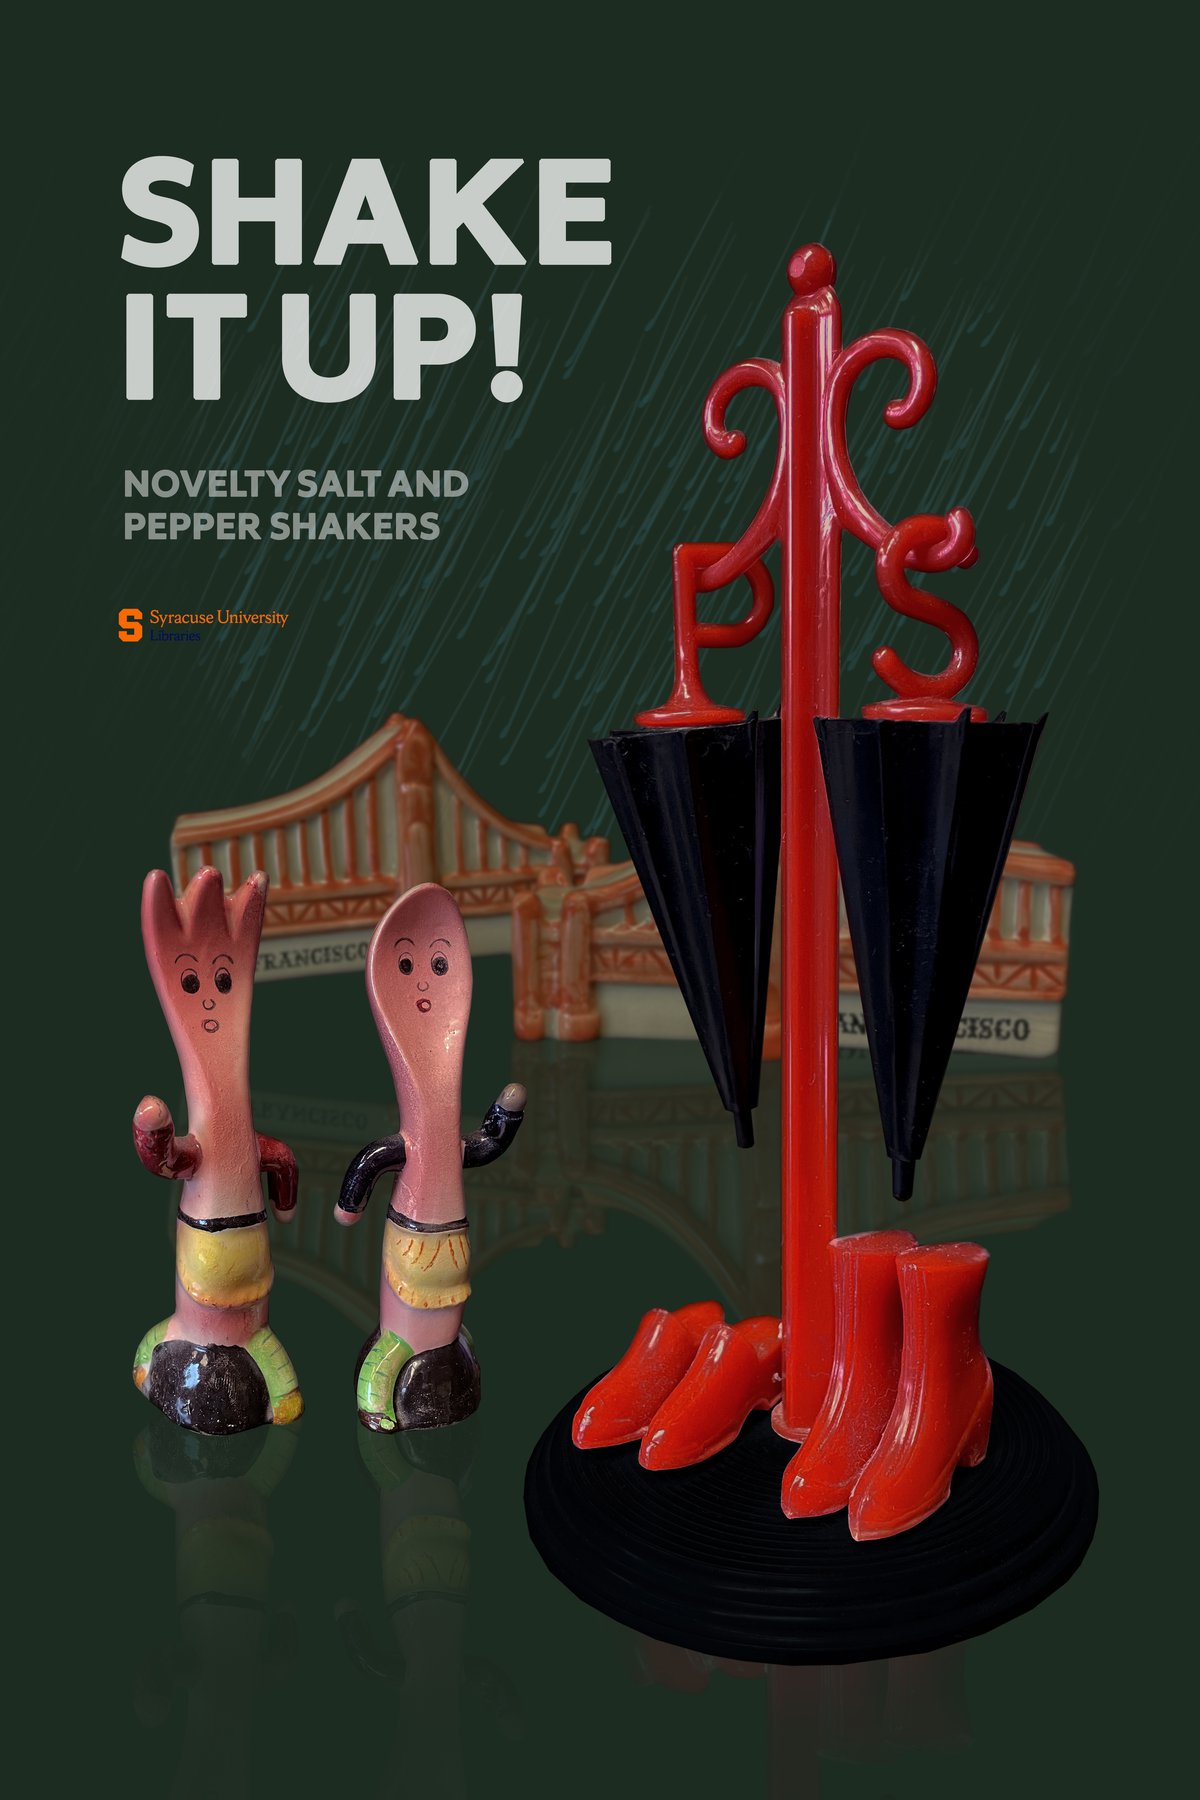 poster that reads "Shake it up!" and has mini umbrella and shoes, mini spoon and fork, and mini bridges salt and pepper shakers